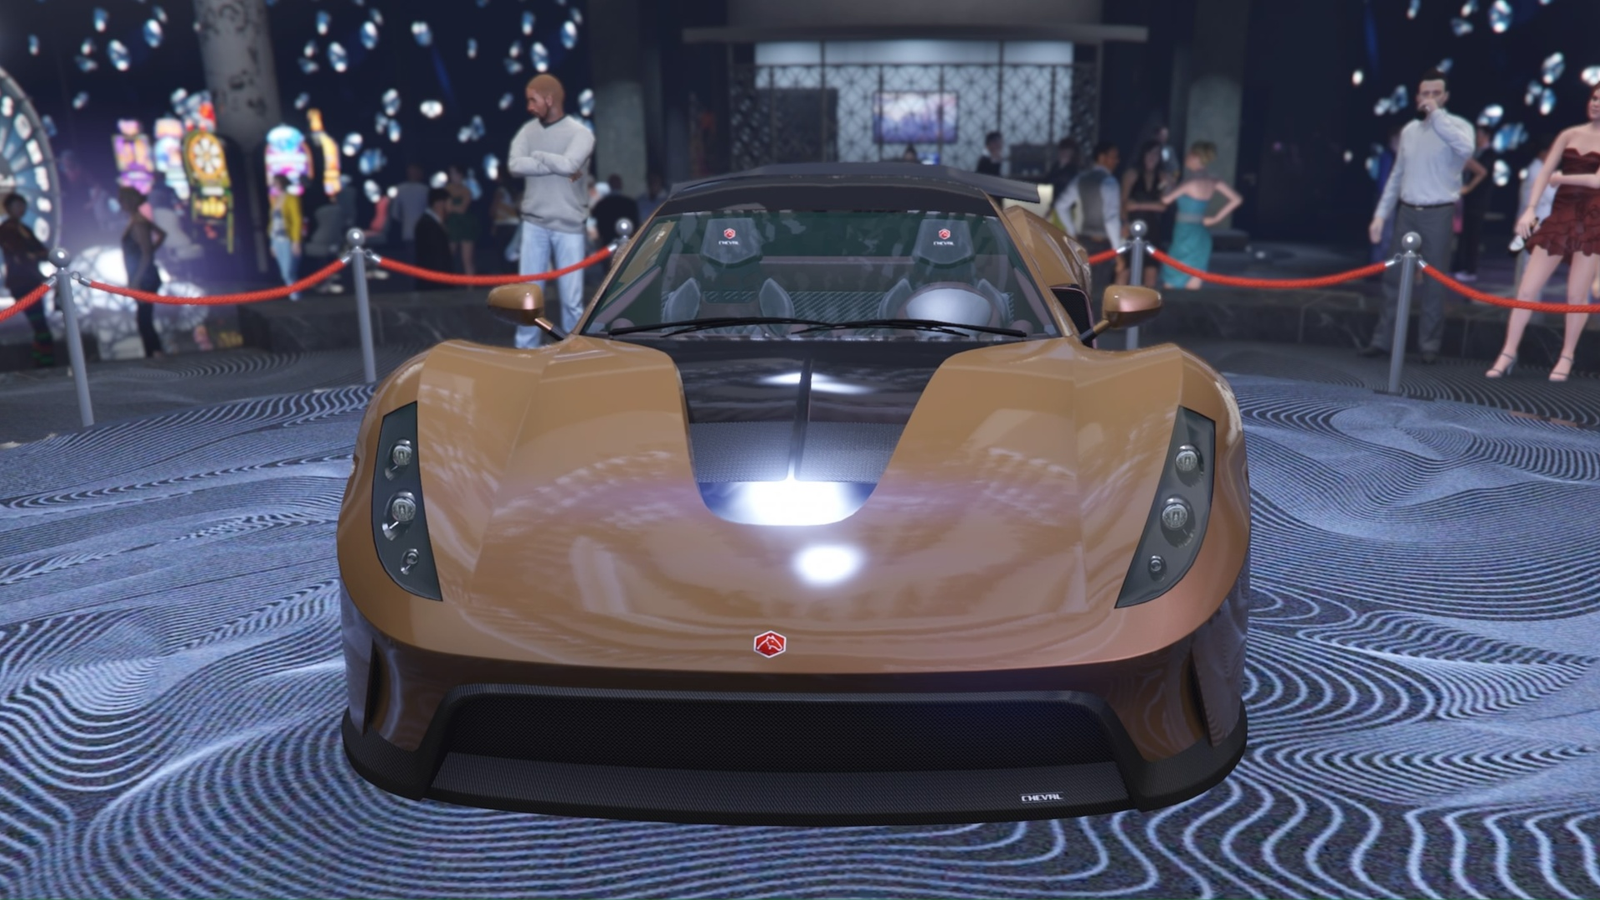 GTA Online gets new content on Xbox Series X